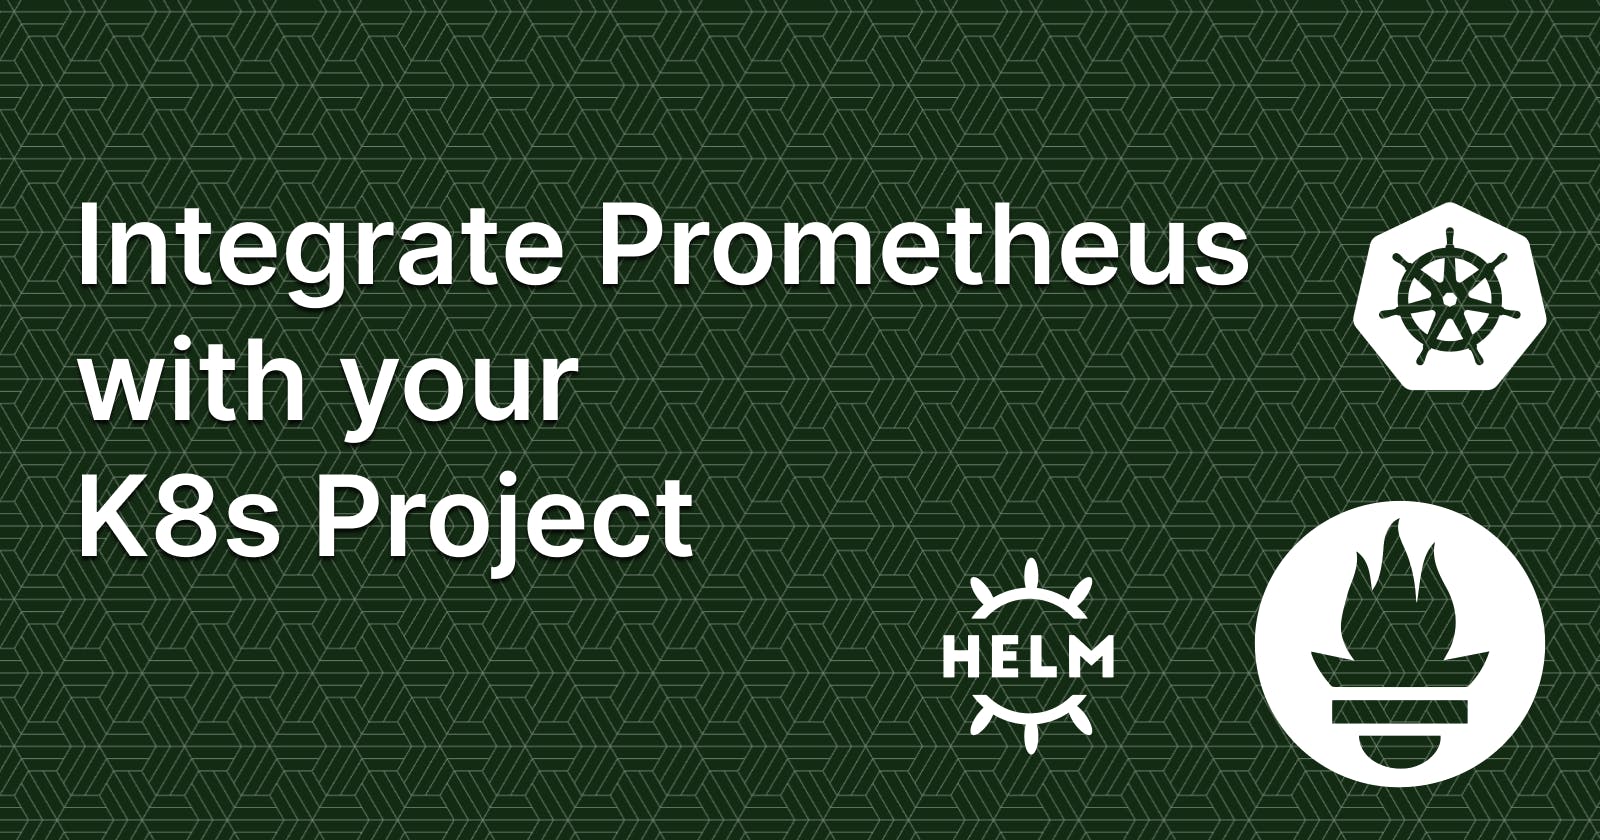 Integrate Prometheus with your K8s Project